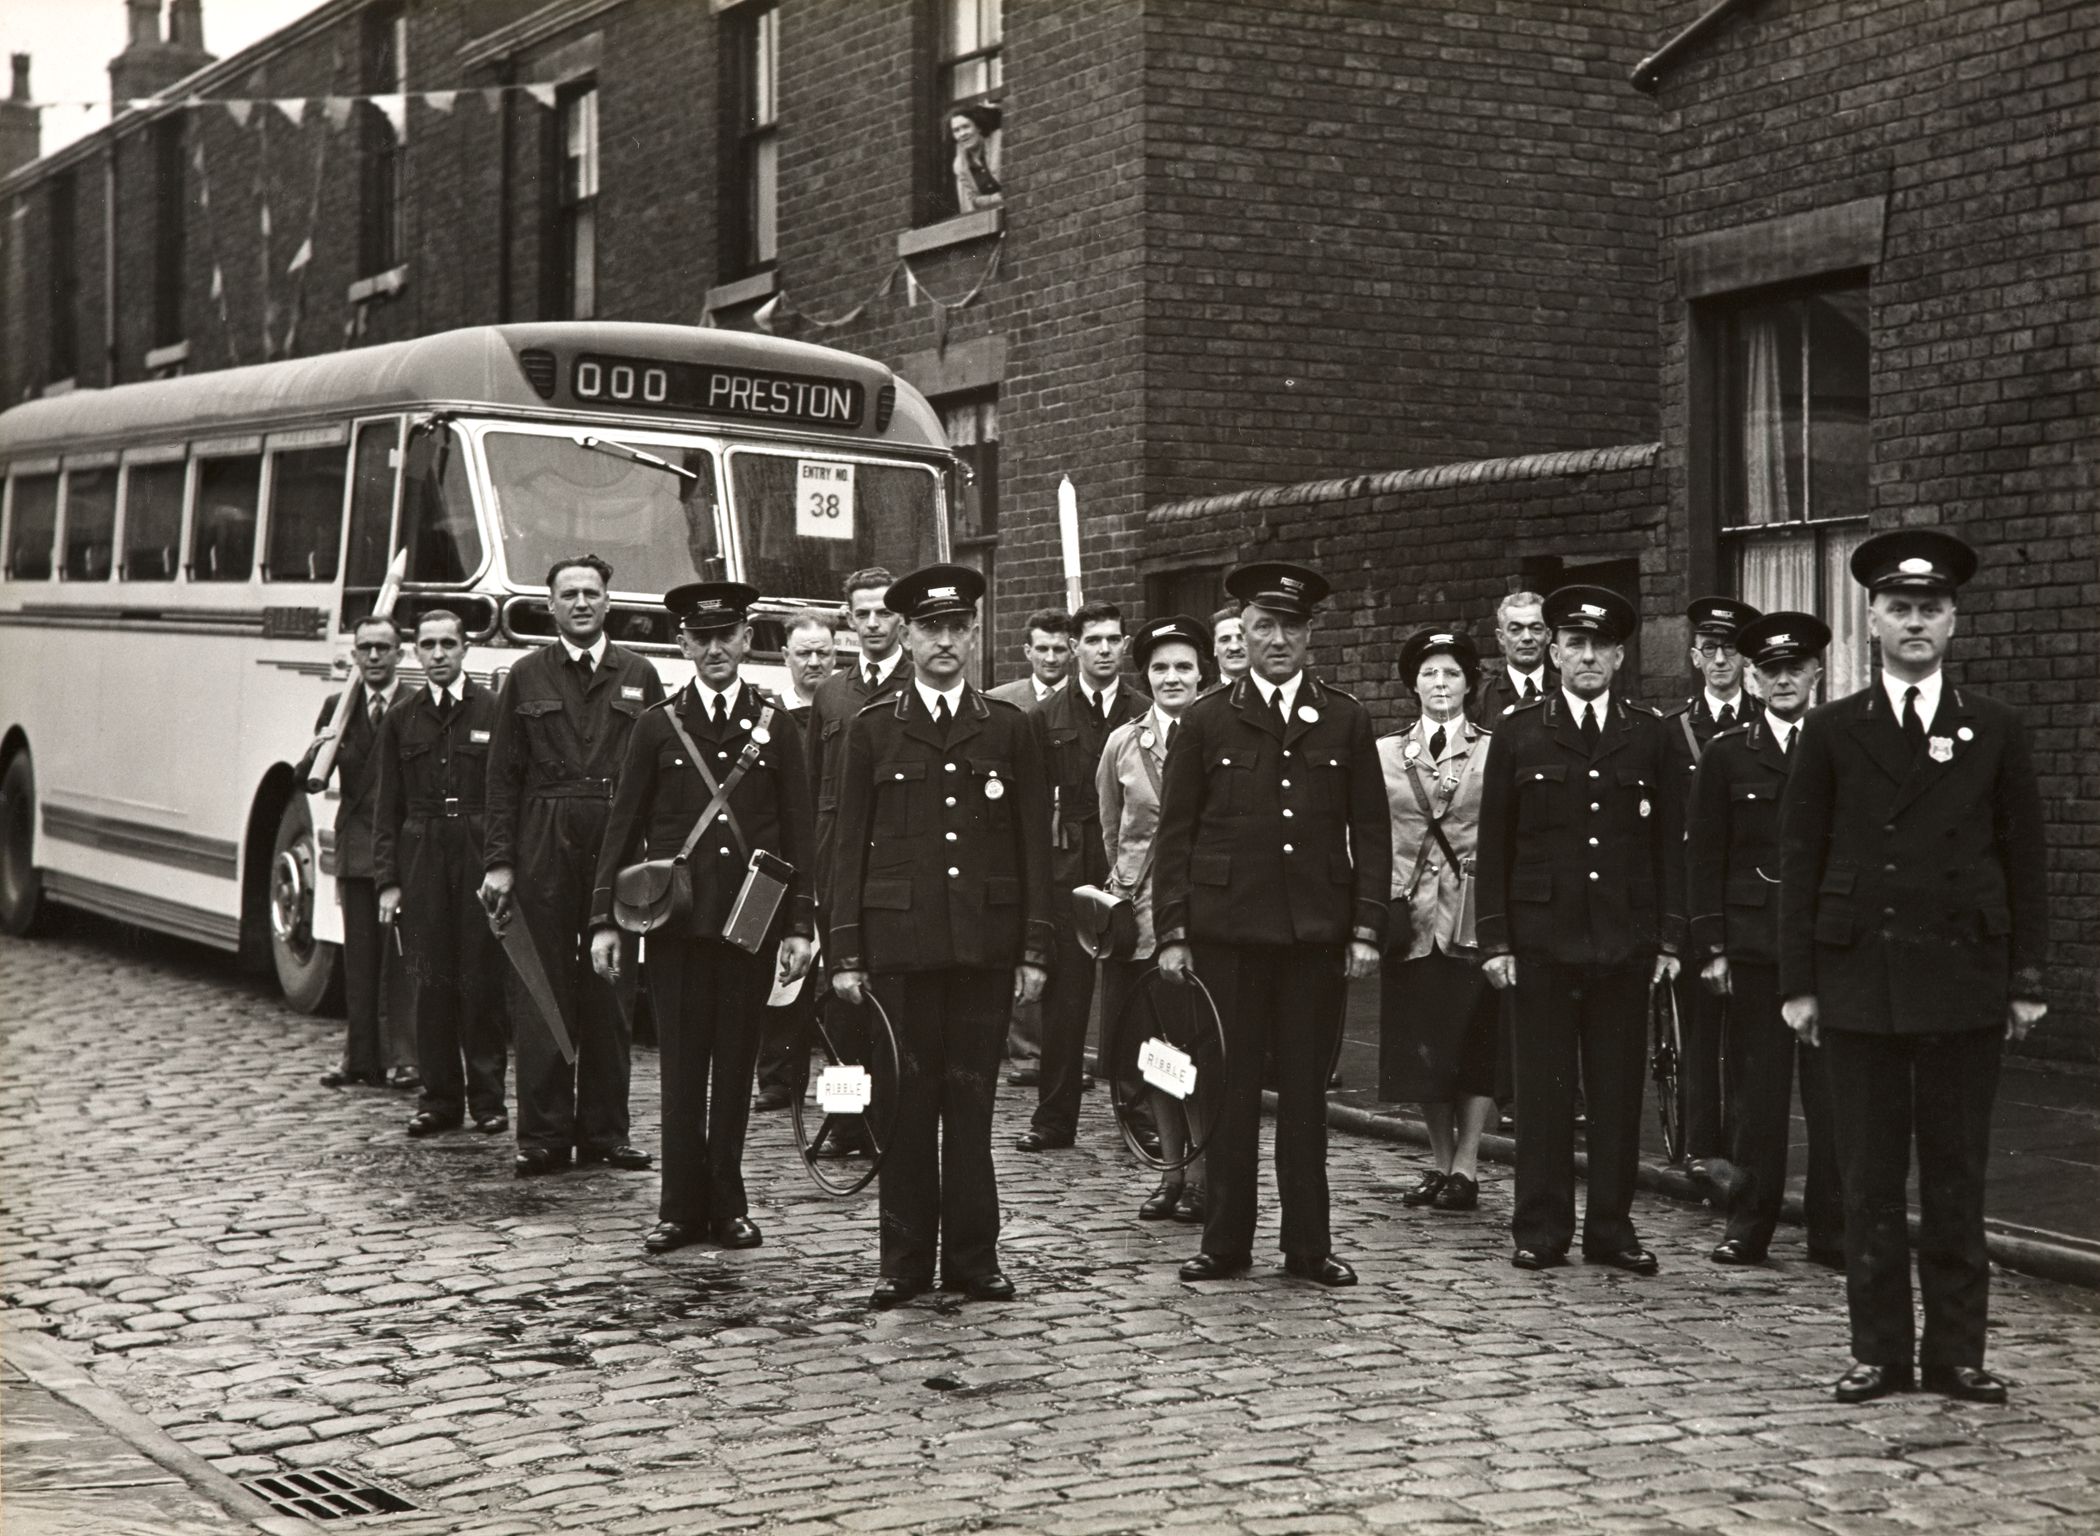 A black and white photograph of bus drivers stood in front of a bus on a cobbled street.